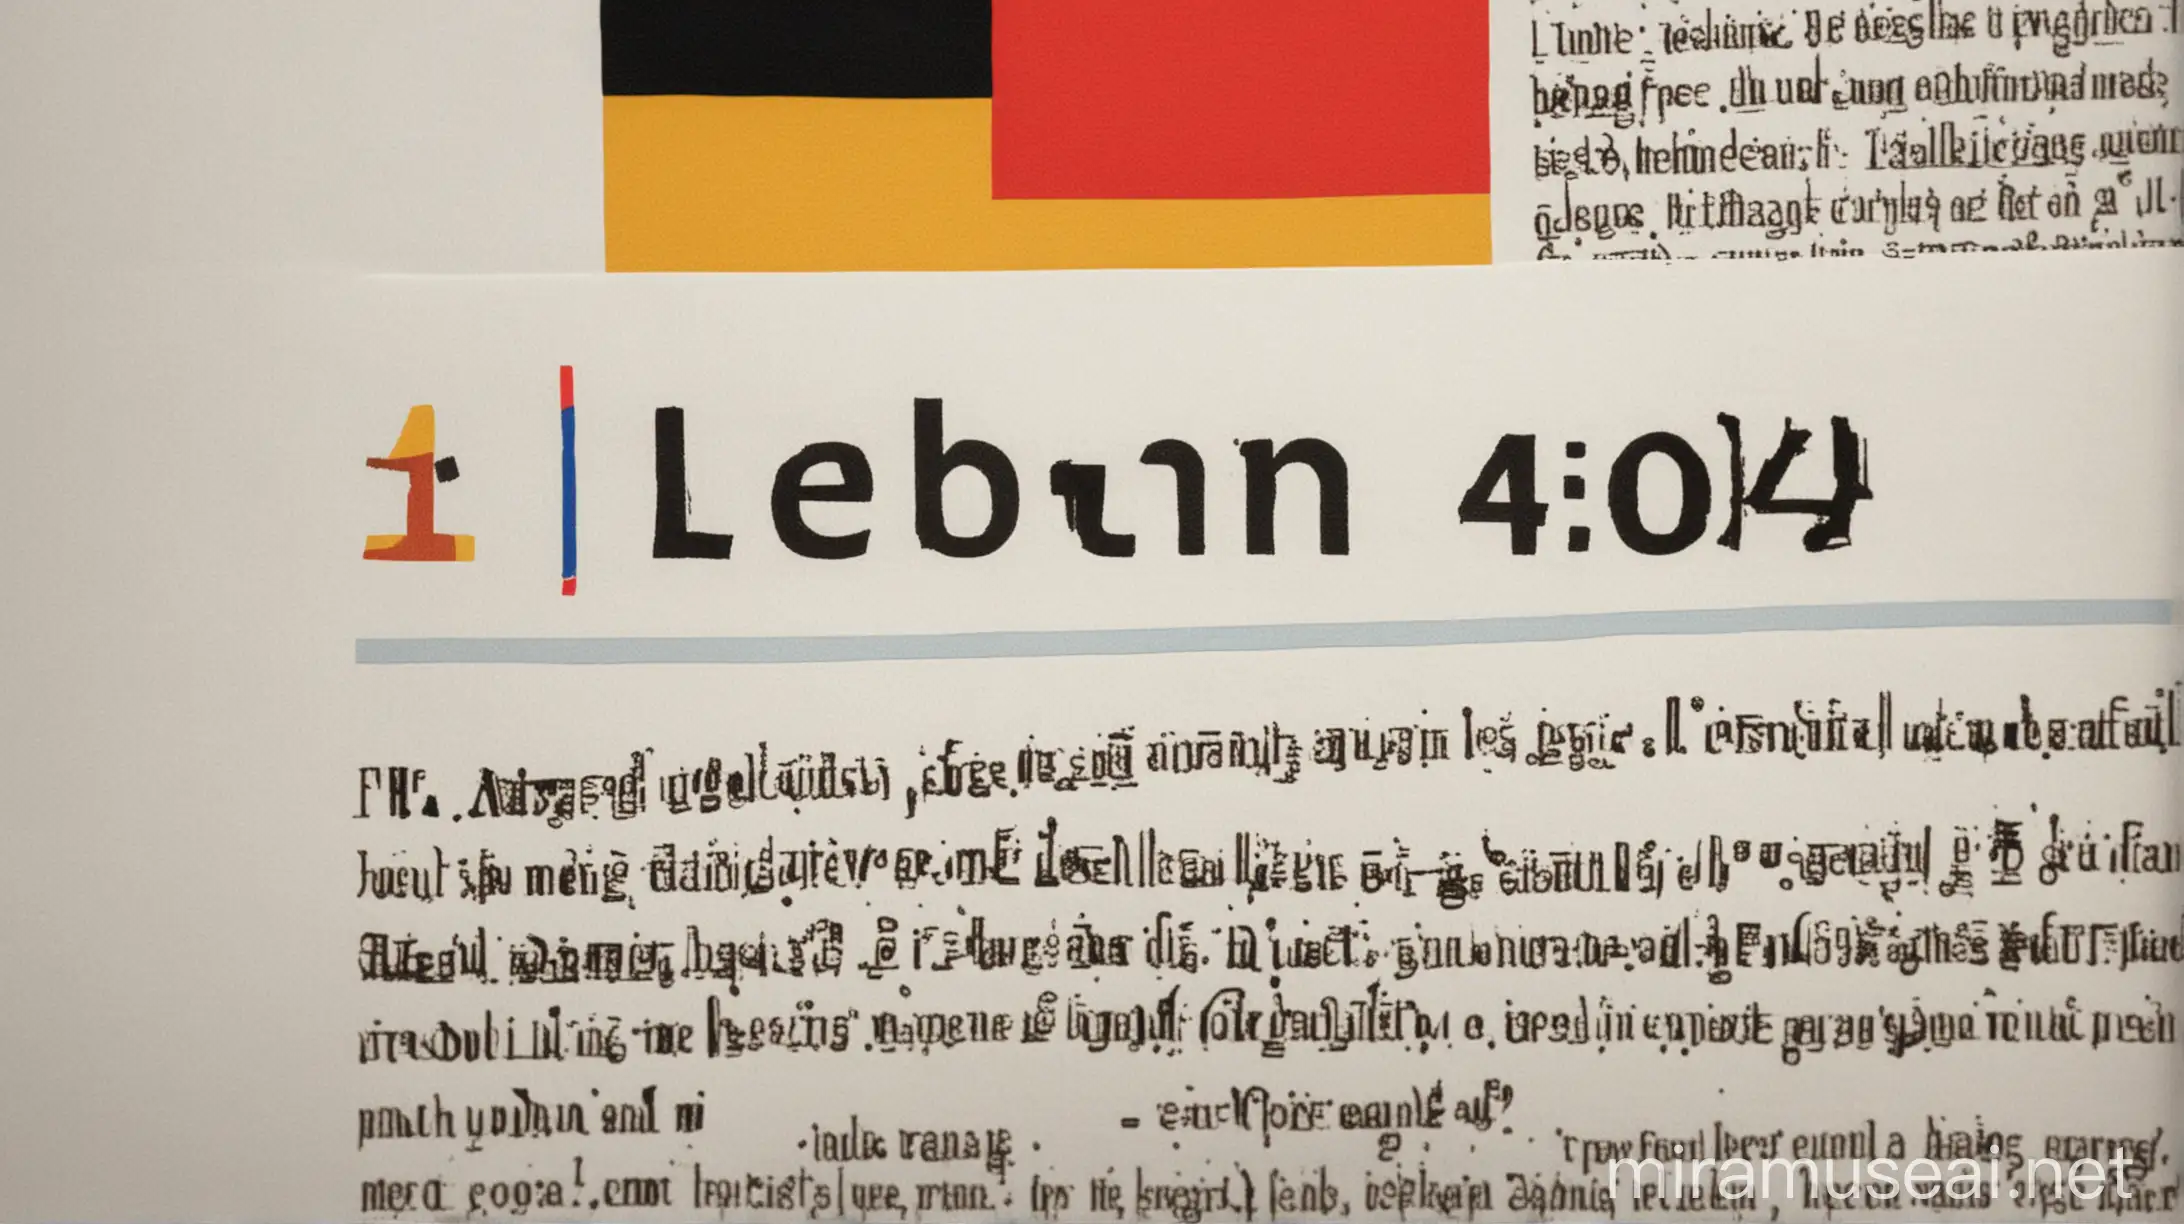 generate page 404 and 500 for leben in deutschland test on english, russian and german